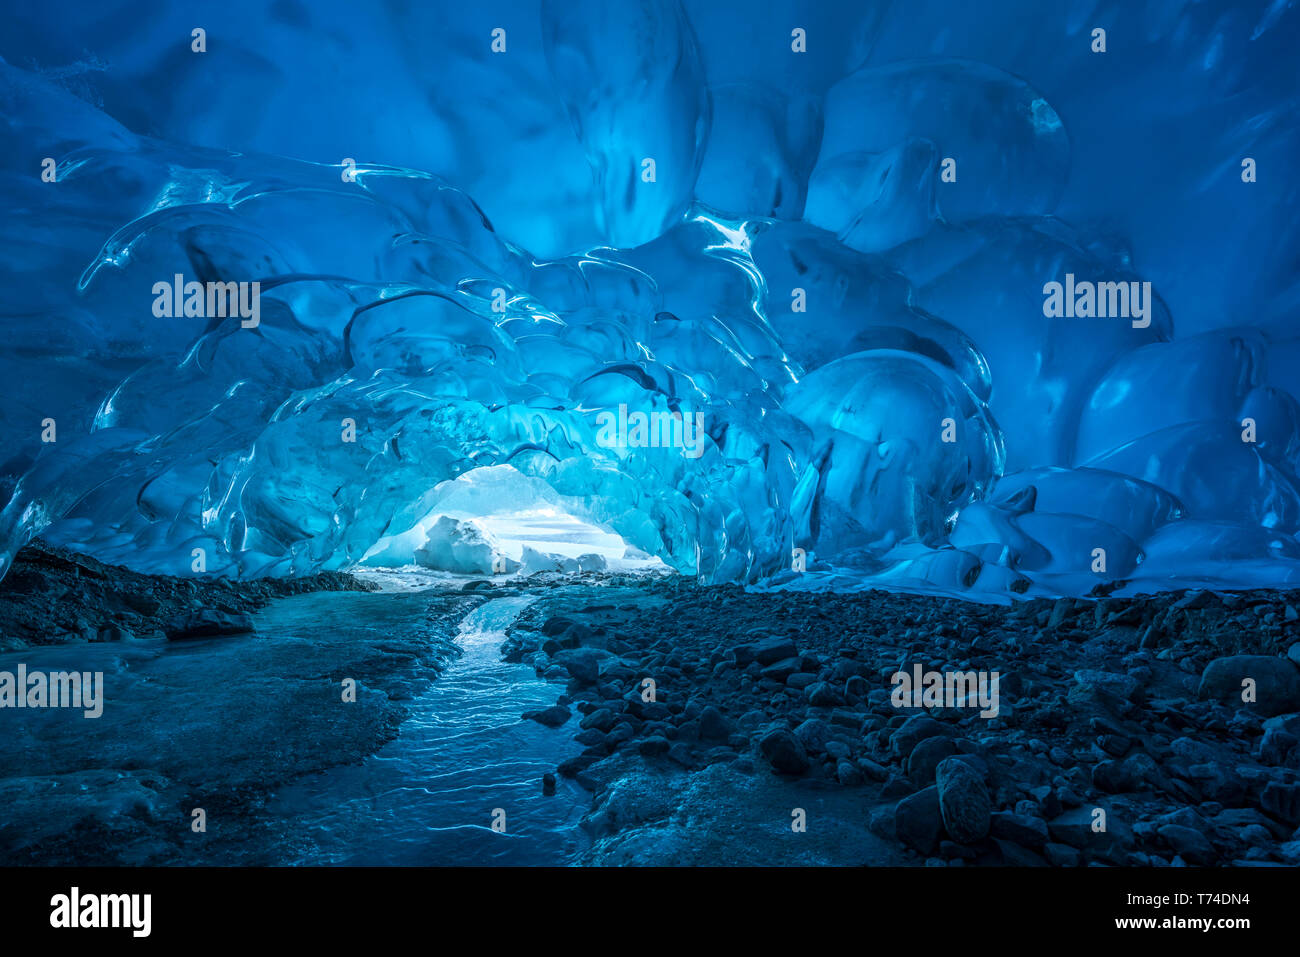 Blue glacial ice is exposed inside an ice cave at the terminus of Mendenhall Glacier, Mendenhall Lake, Tongass National Forest Stock Photo